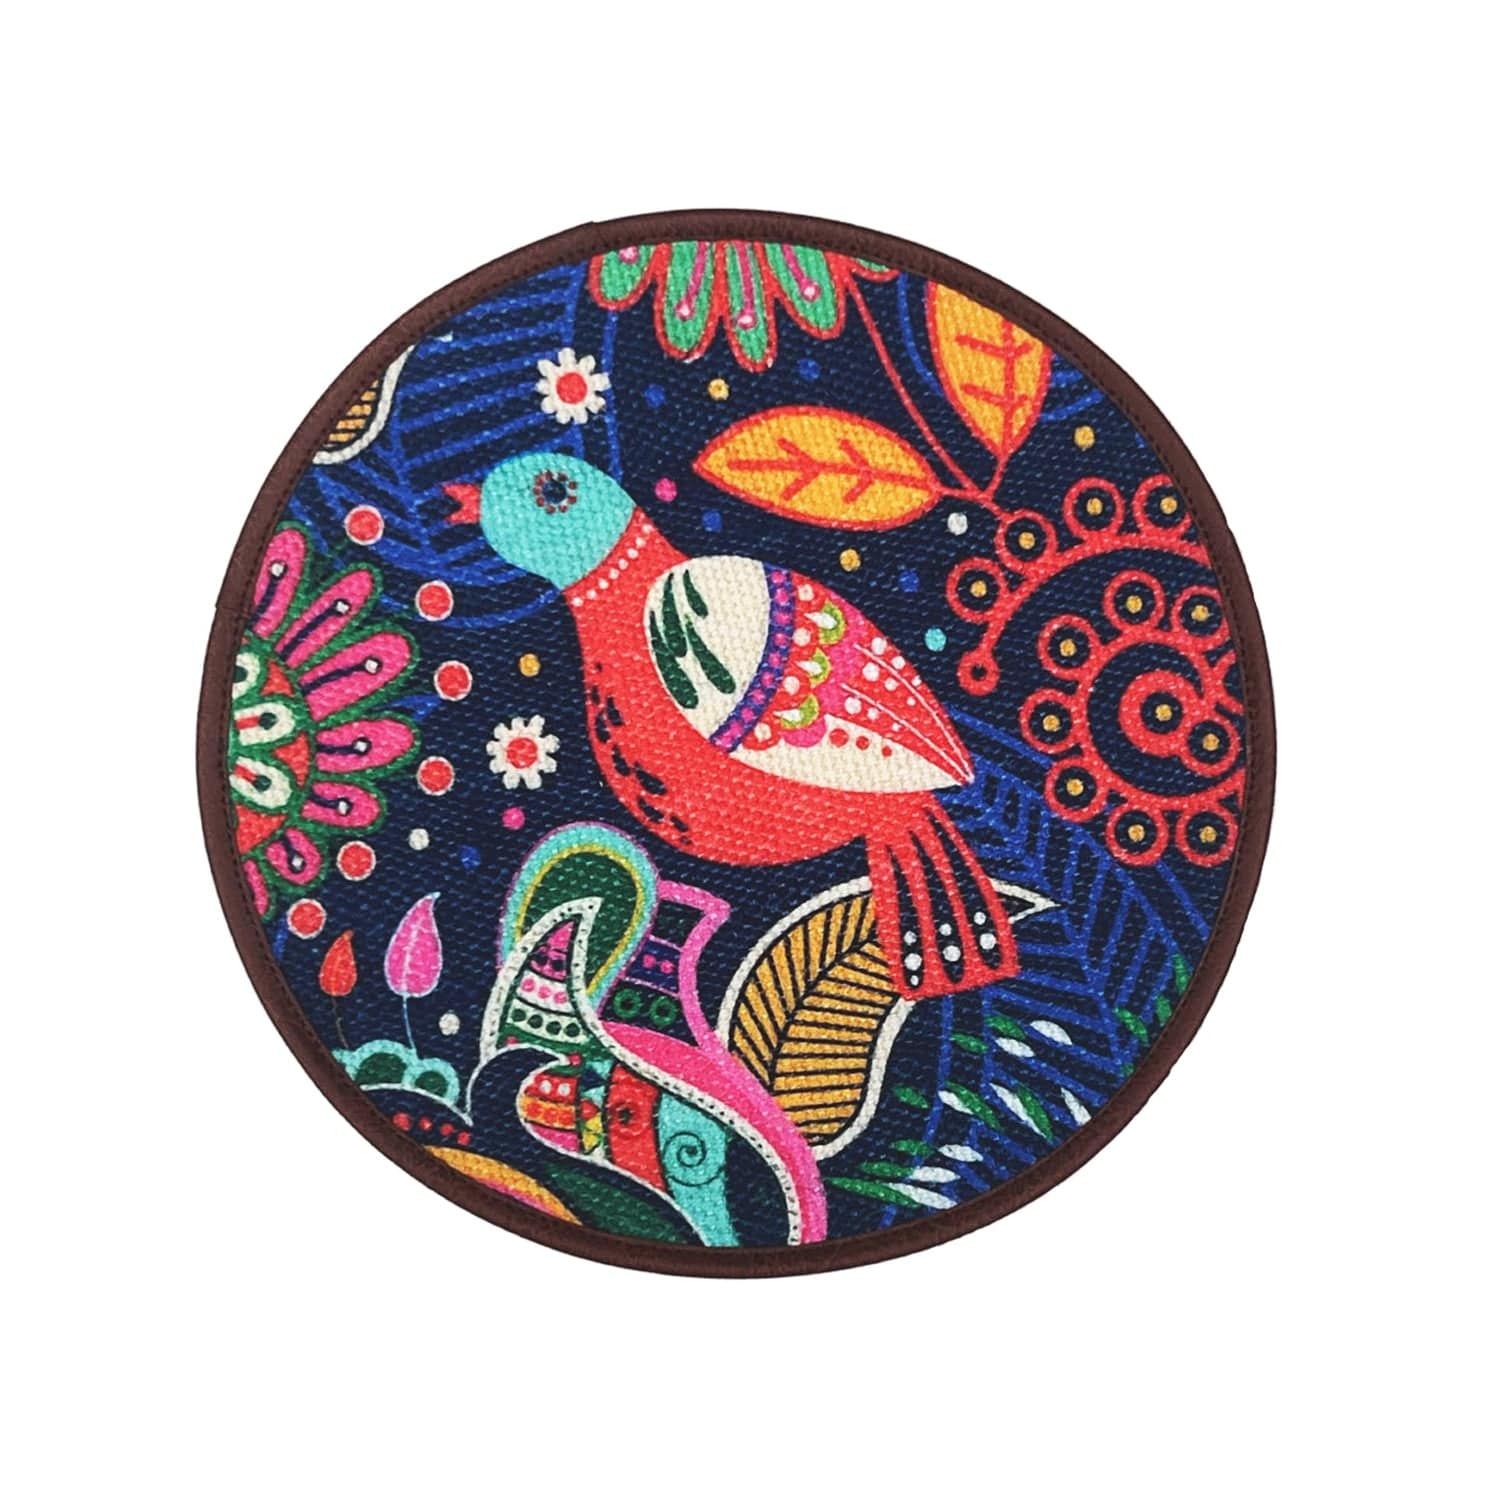 Mona B Set of 2 Printed Placemats, 13 INCH Round, Best for Bed-Side Table/Center Table, Dining Table/Shelves - PP-111 - Placemat by Mona-B - Shop1999, Shop2999, Shop3999